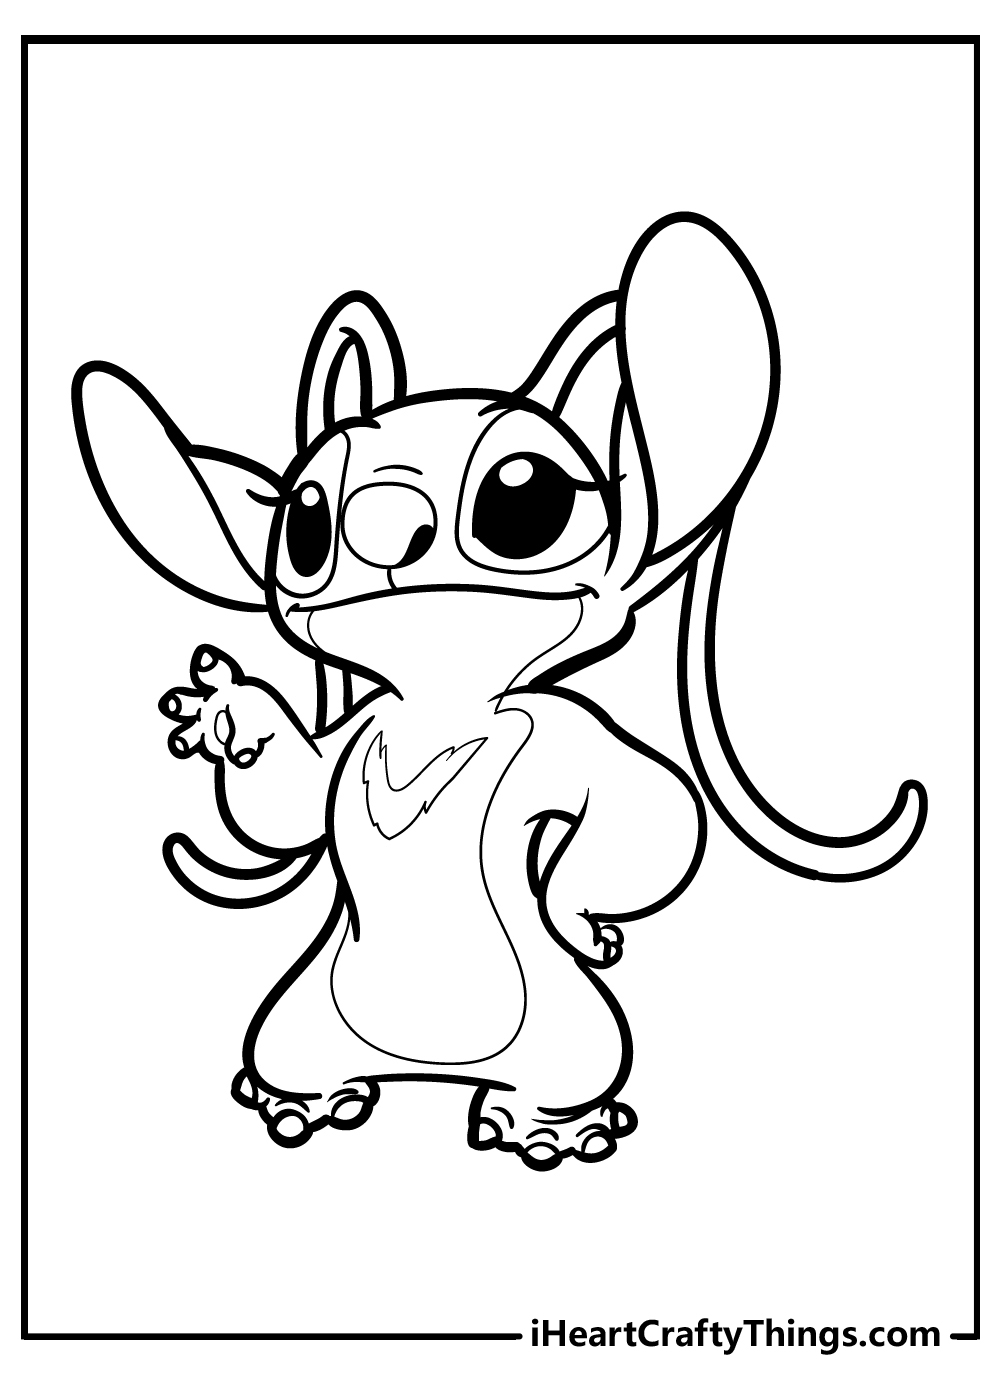 Stitch and angel printable coloring pages